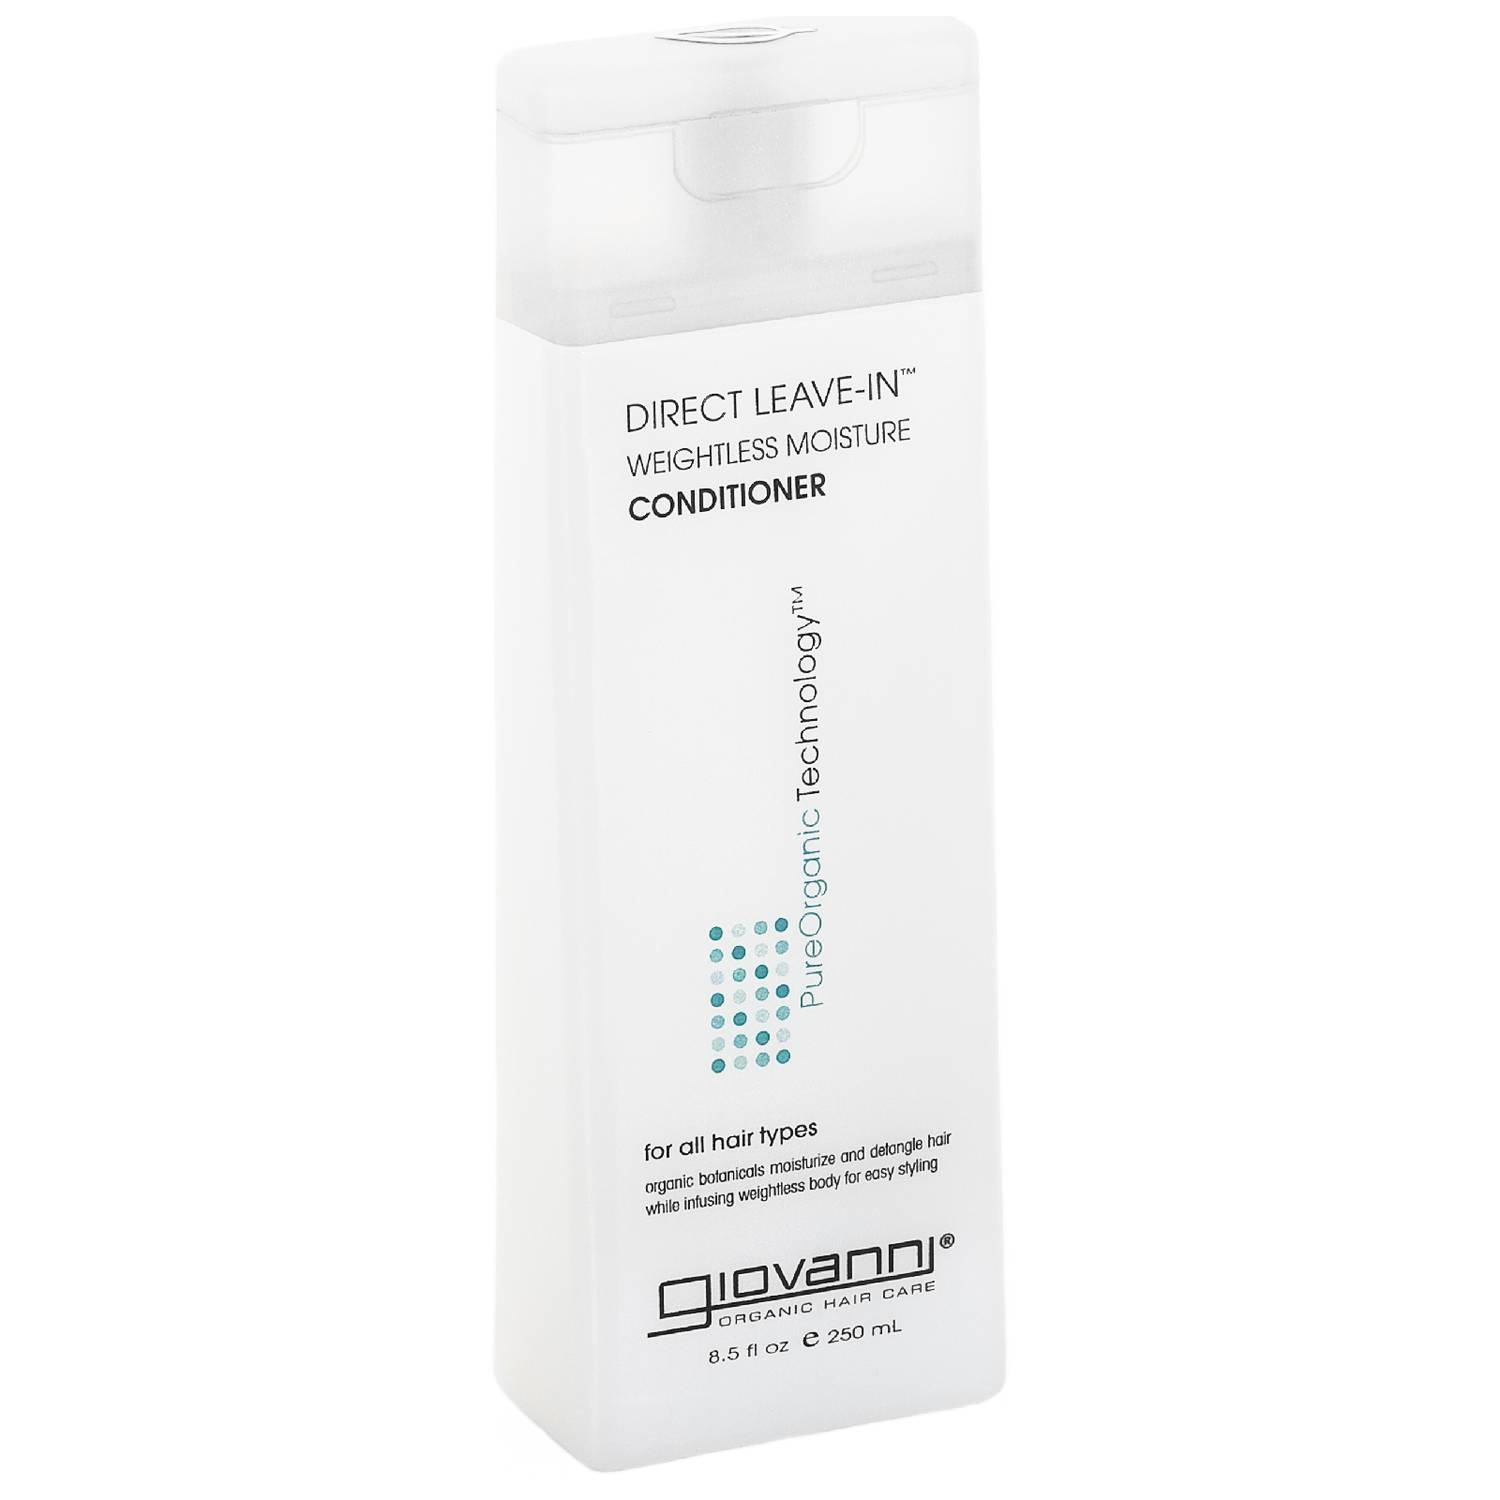 Giovanni DIRECT LEAVE-IN ™ Weightless Moisture Conditioner 250ml